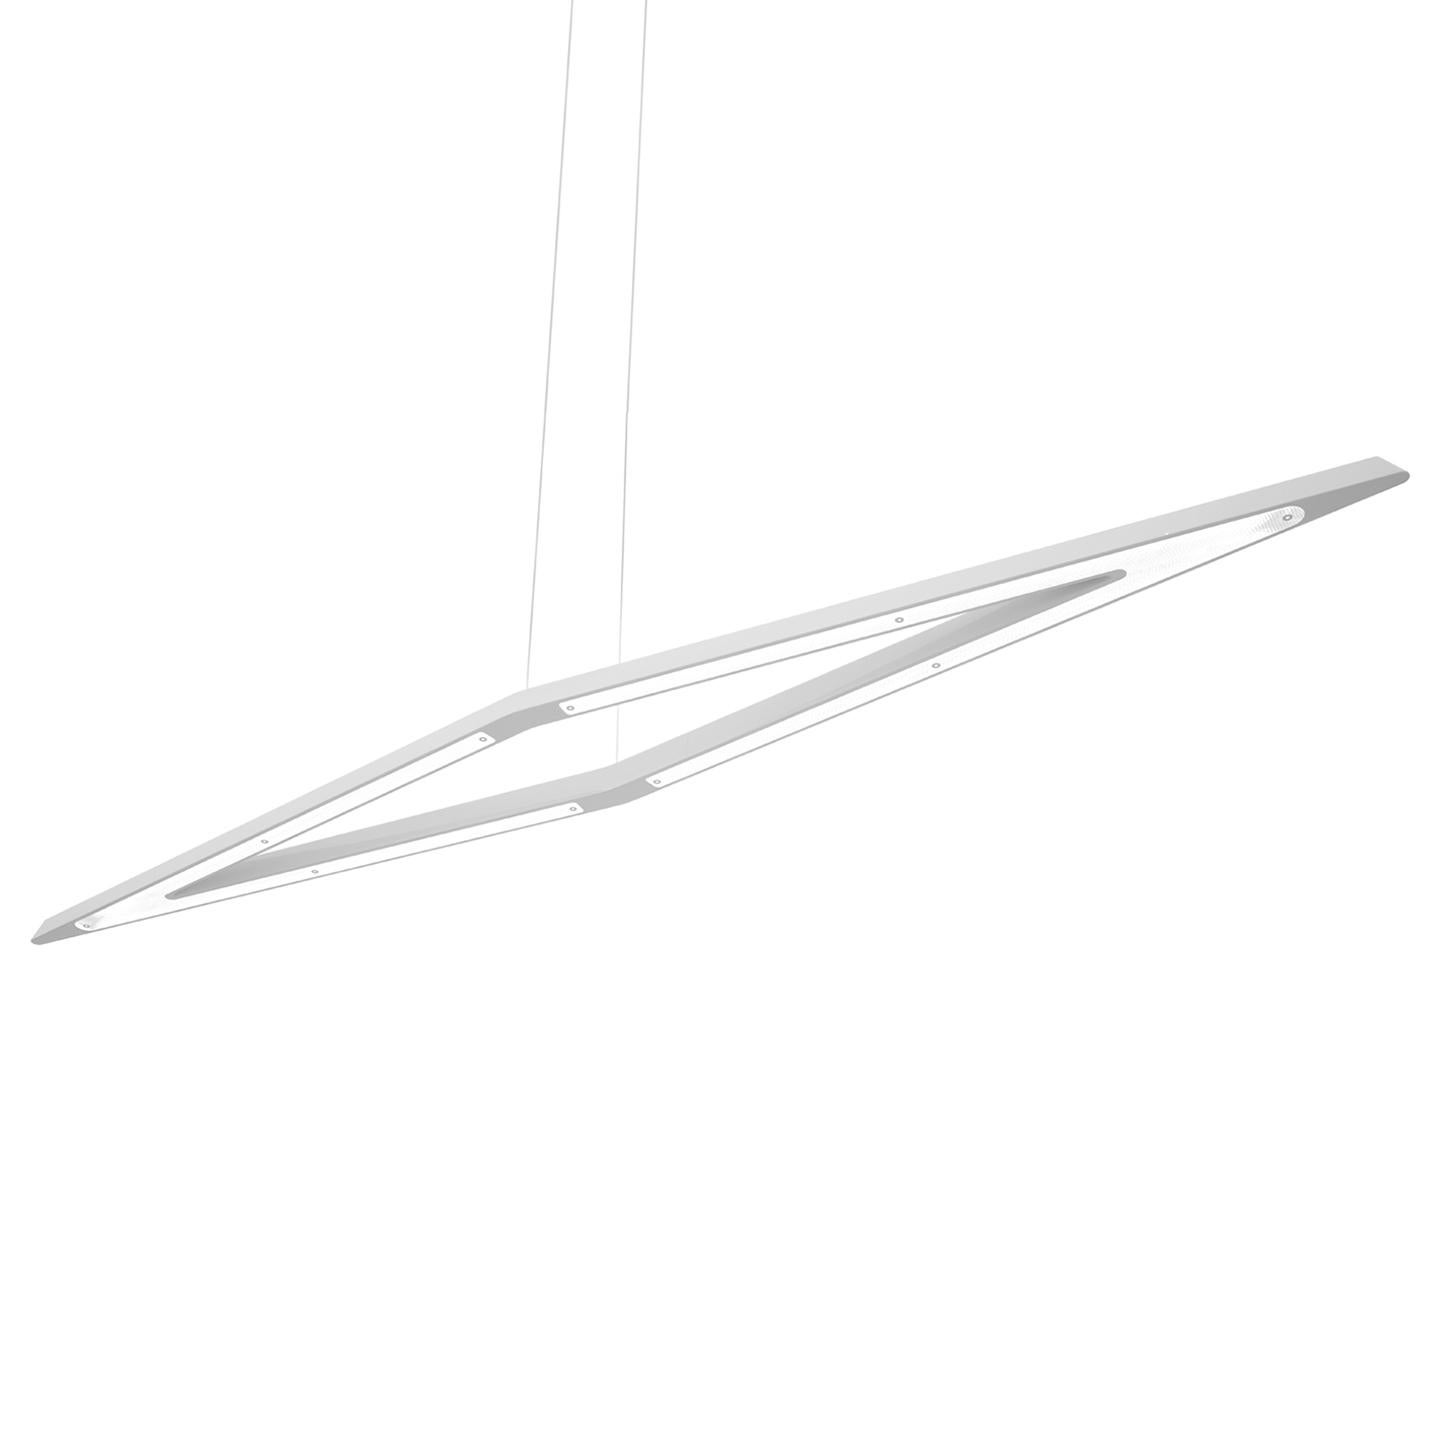 Slim and sleek, Flecha pendant was designed by Jorge Pensi with a distinctive silhouette that effortlessly floats light. Flecha uses micro-prismatic diffusers to soften the light and create excellent lighting for working or reading. The Flecha